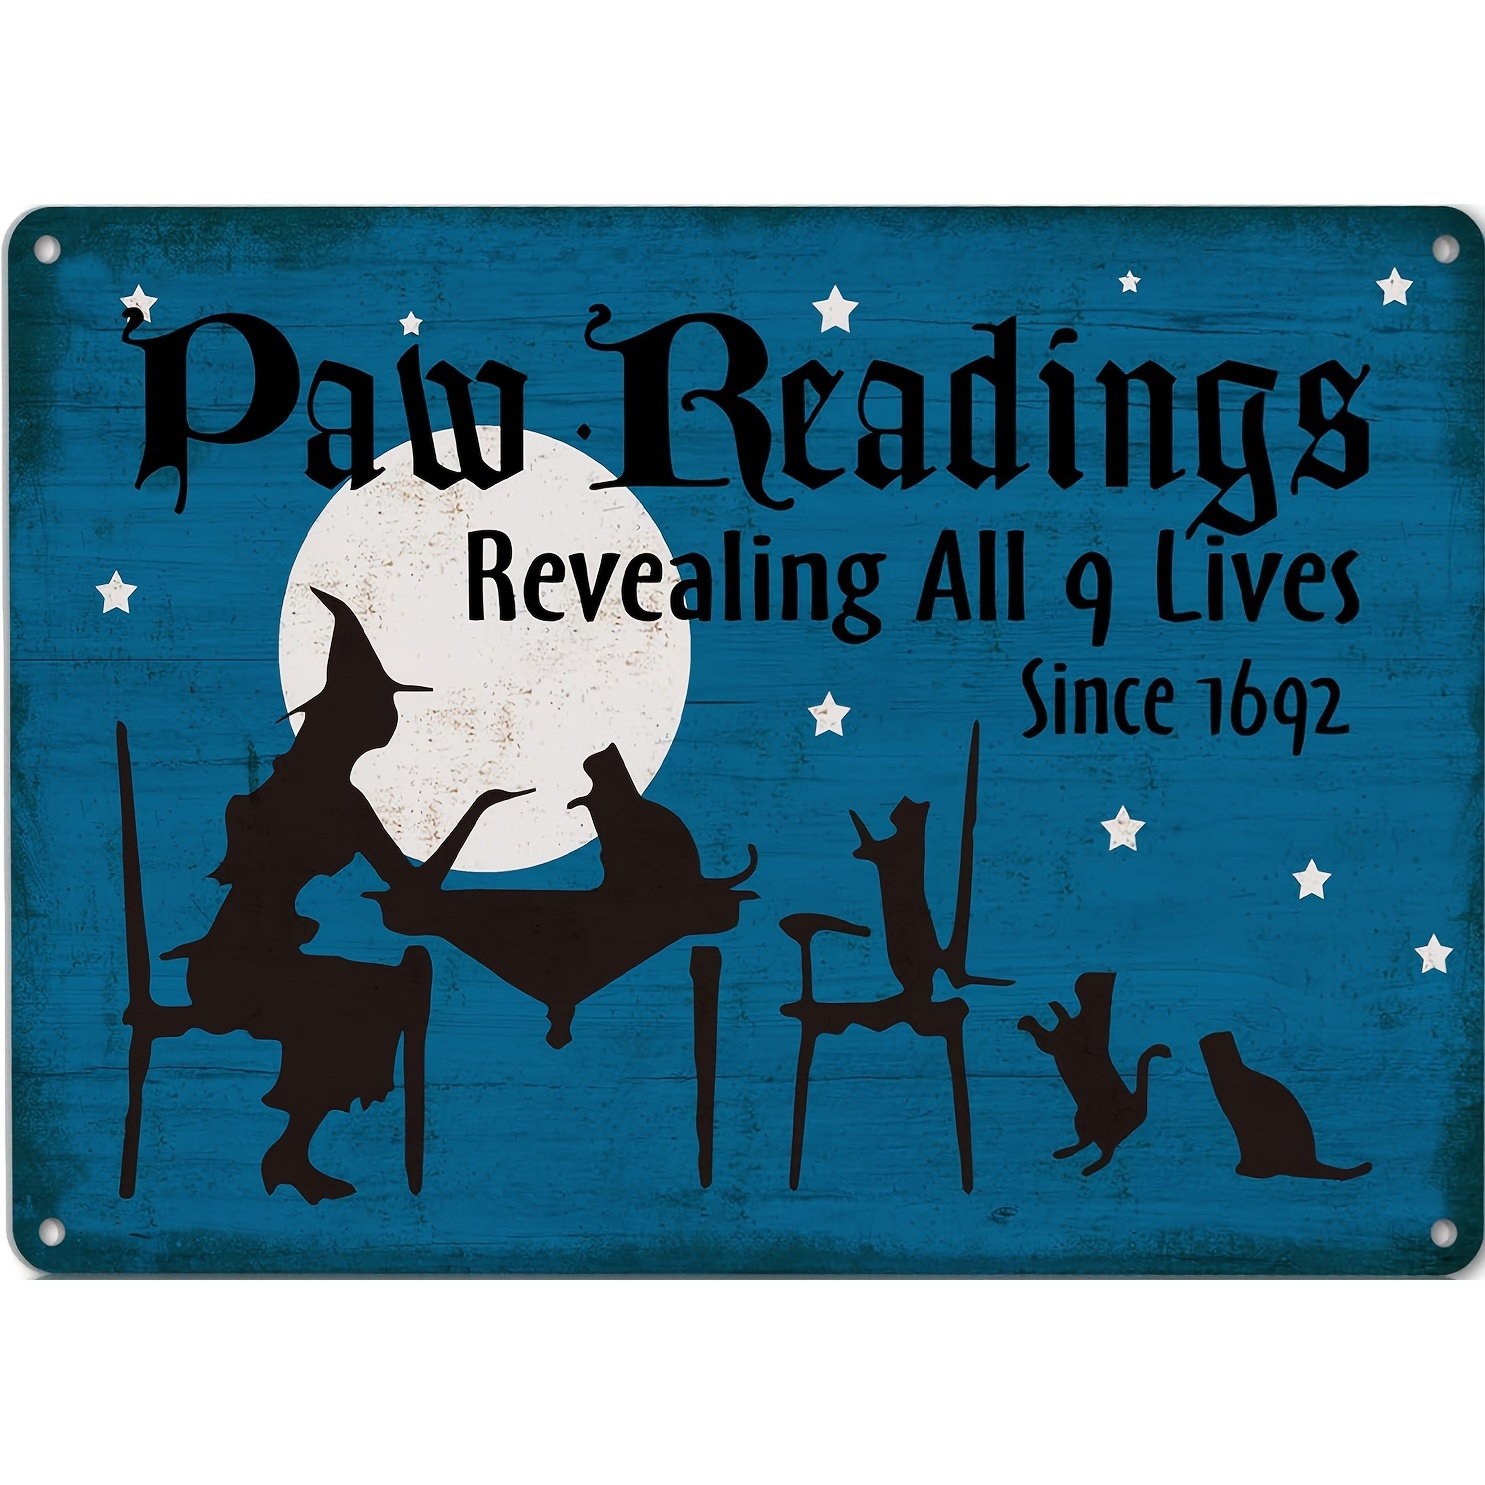 

Paw Readings Metal Sign, Wall Hanging Halloween Decor, Suede Vintage Tin Sign With Witches & Black Cats, English Language, Multipurpose Gothic Yard Decoration, 8x12 Inch - 1 Pc